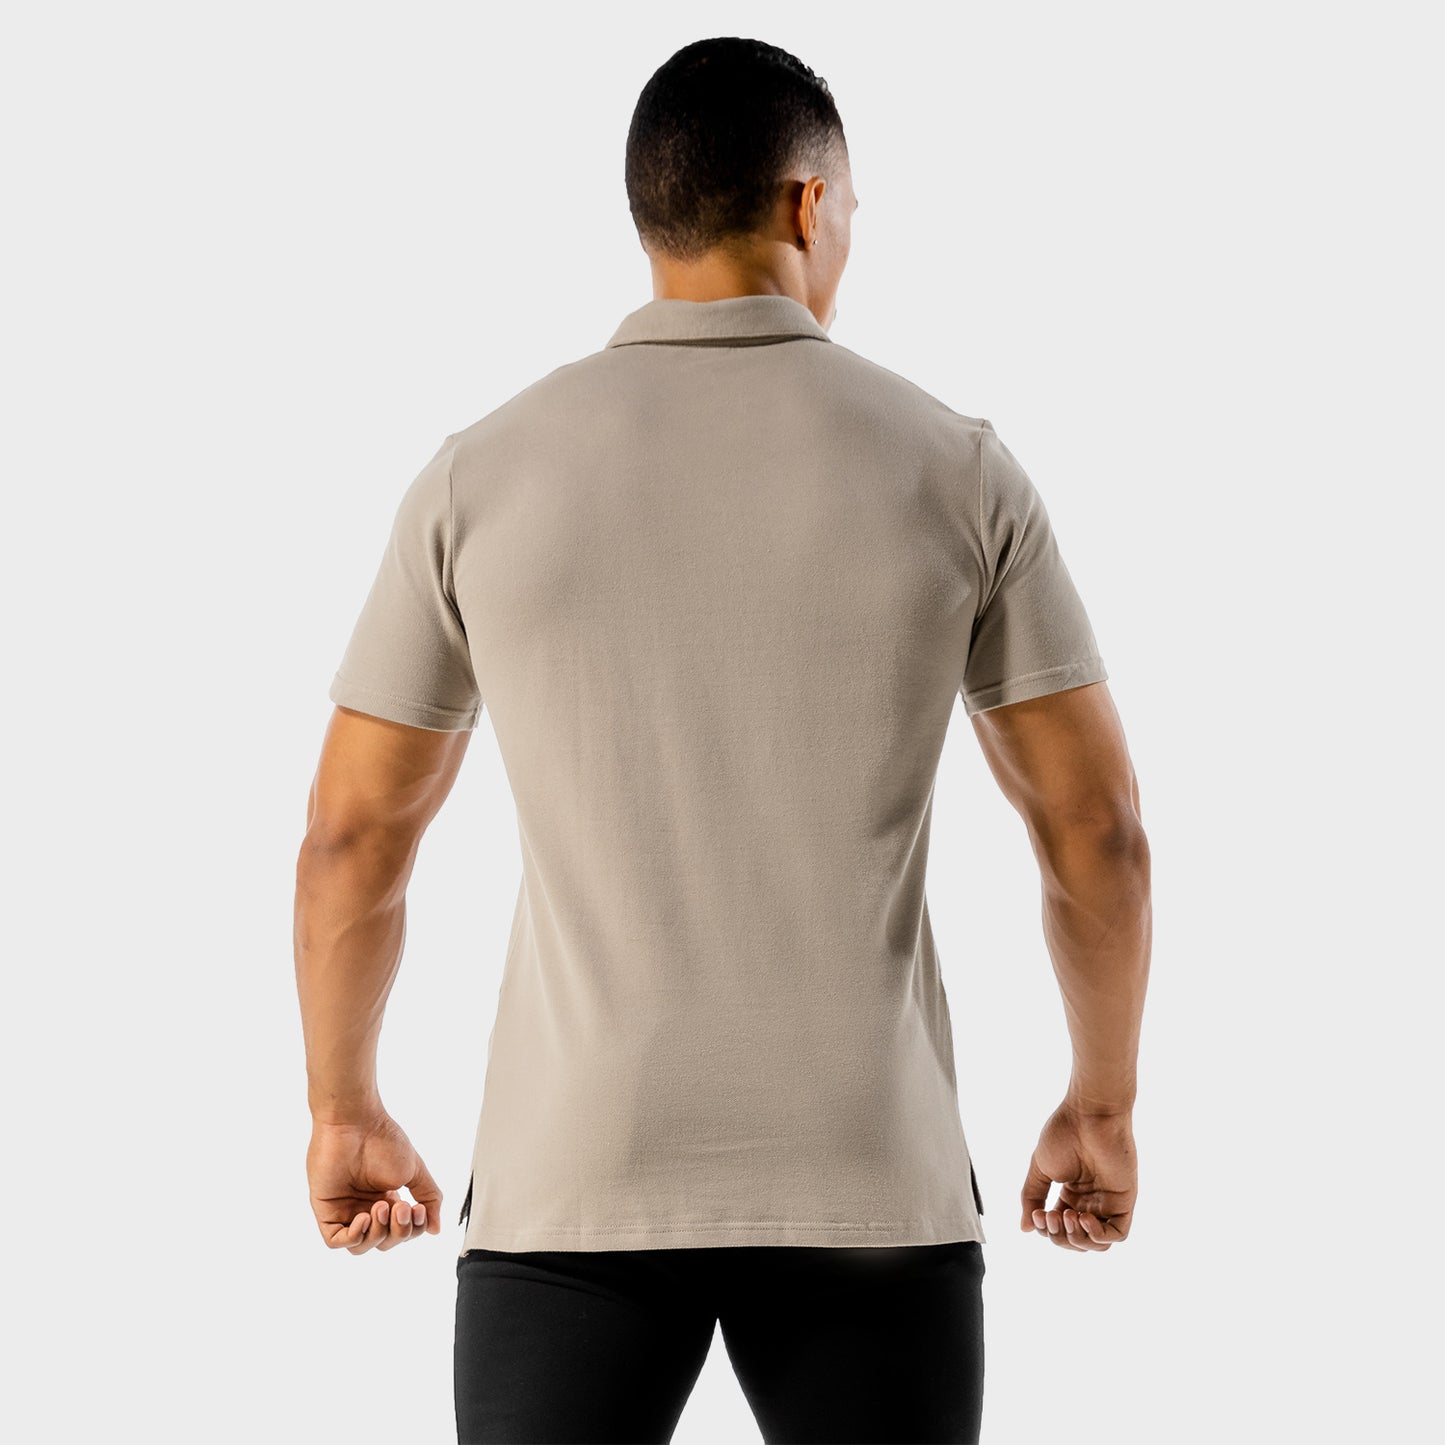 squatwolf-gym-wear-core-tee-polo-grey-workout-shirts-for-men